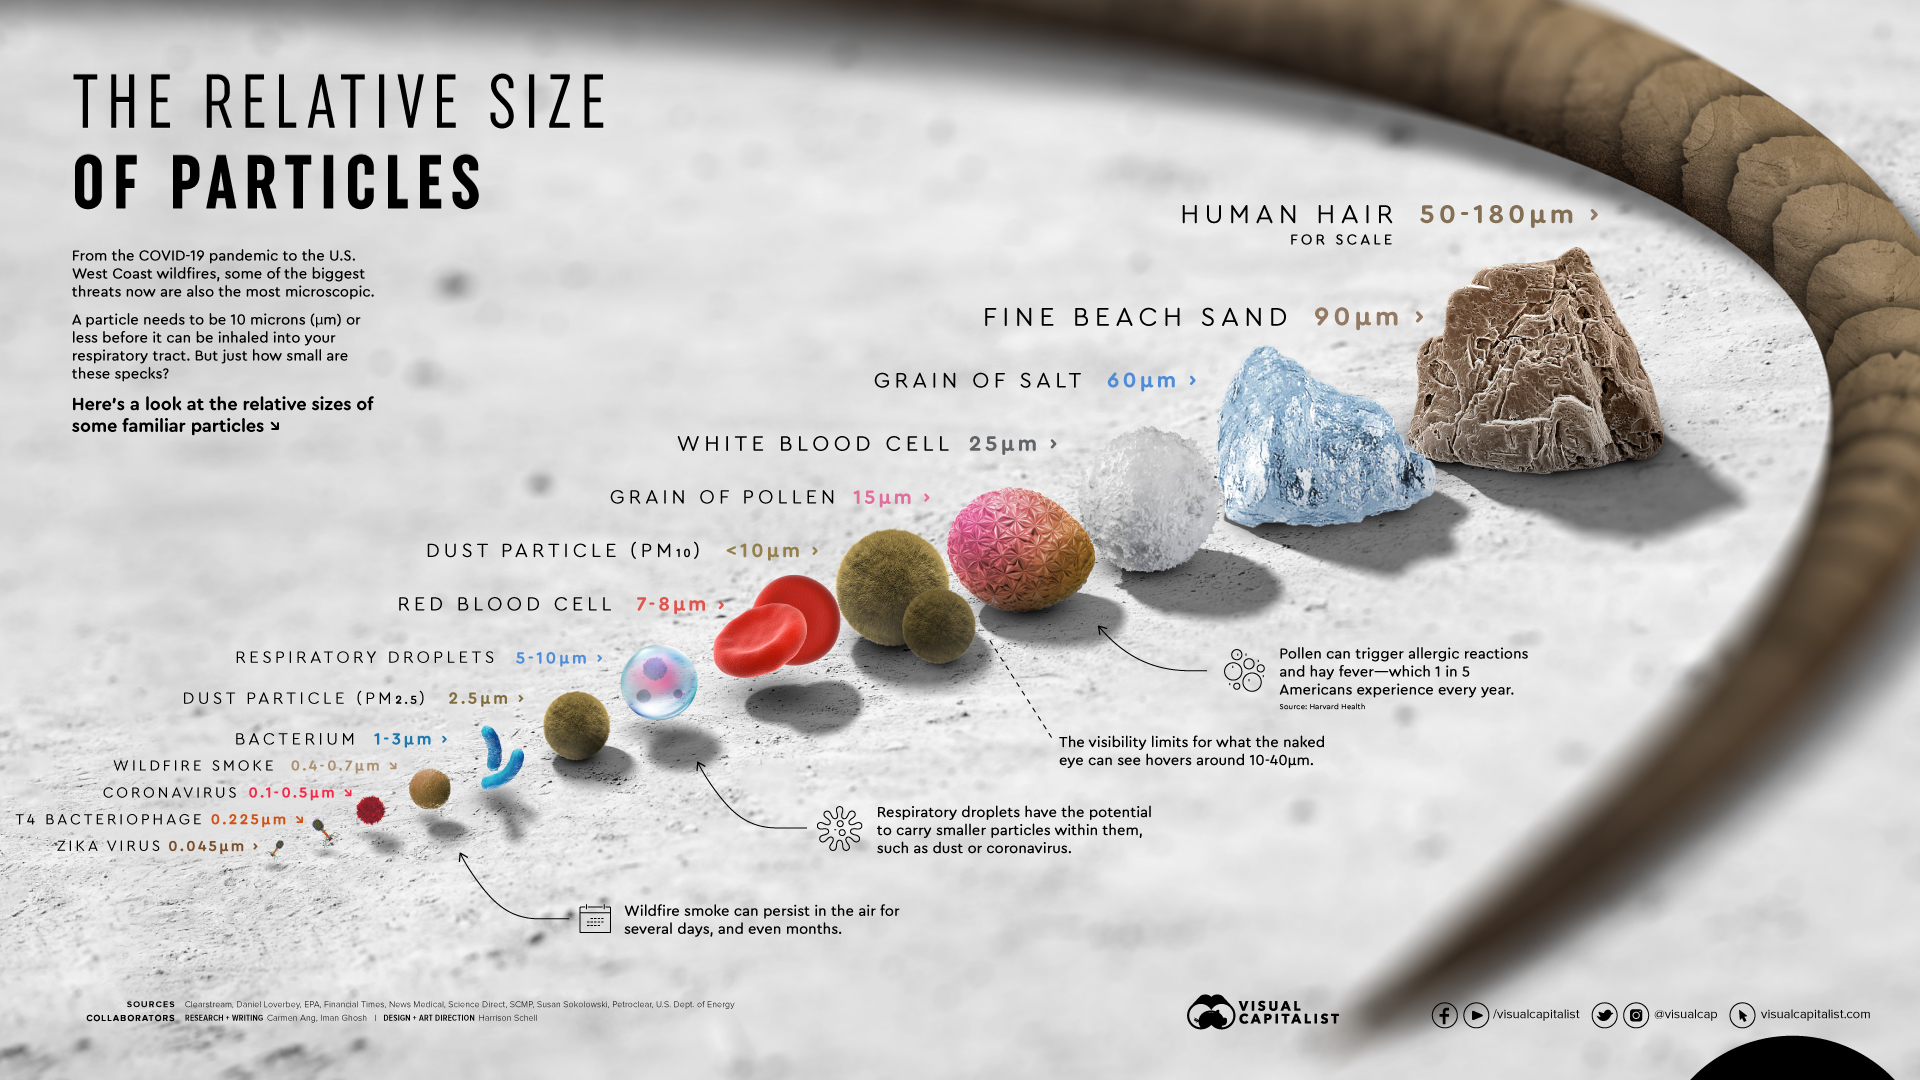 Relative-Size-of-Particles-Infographic-full.jpg